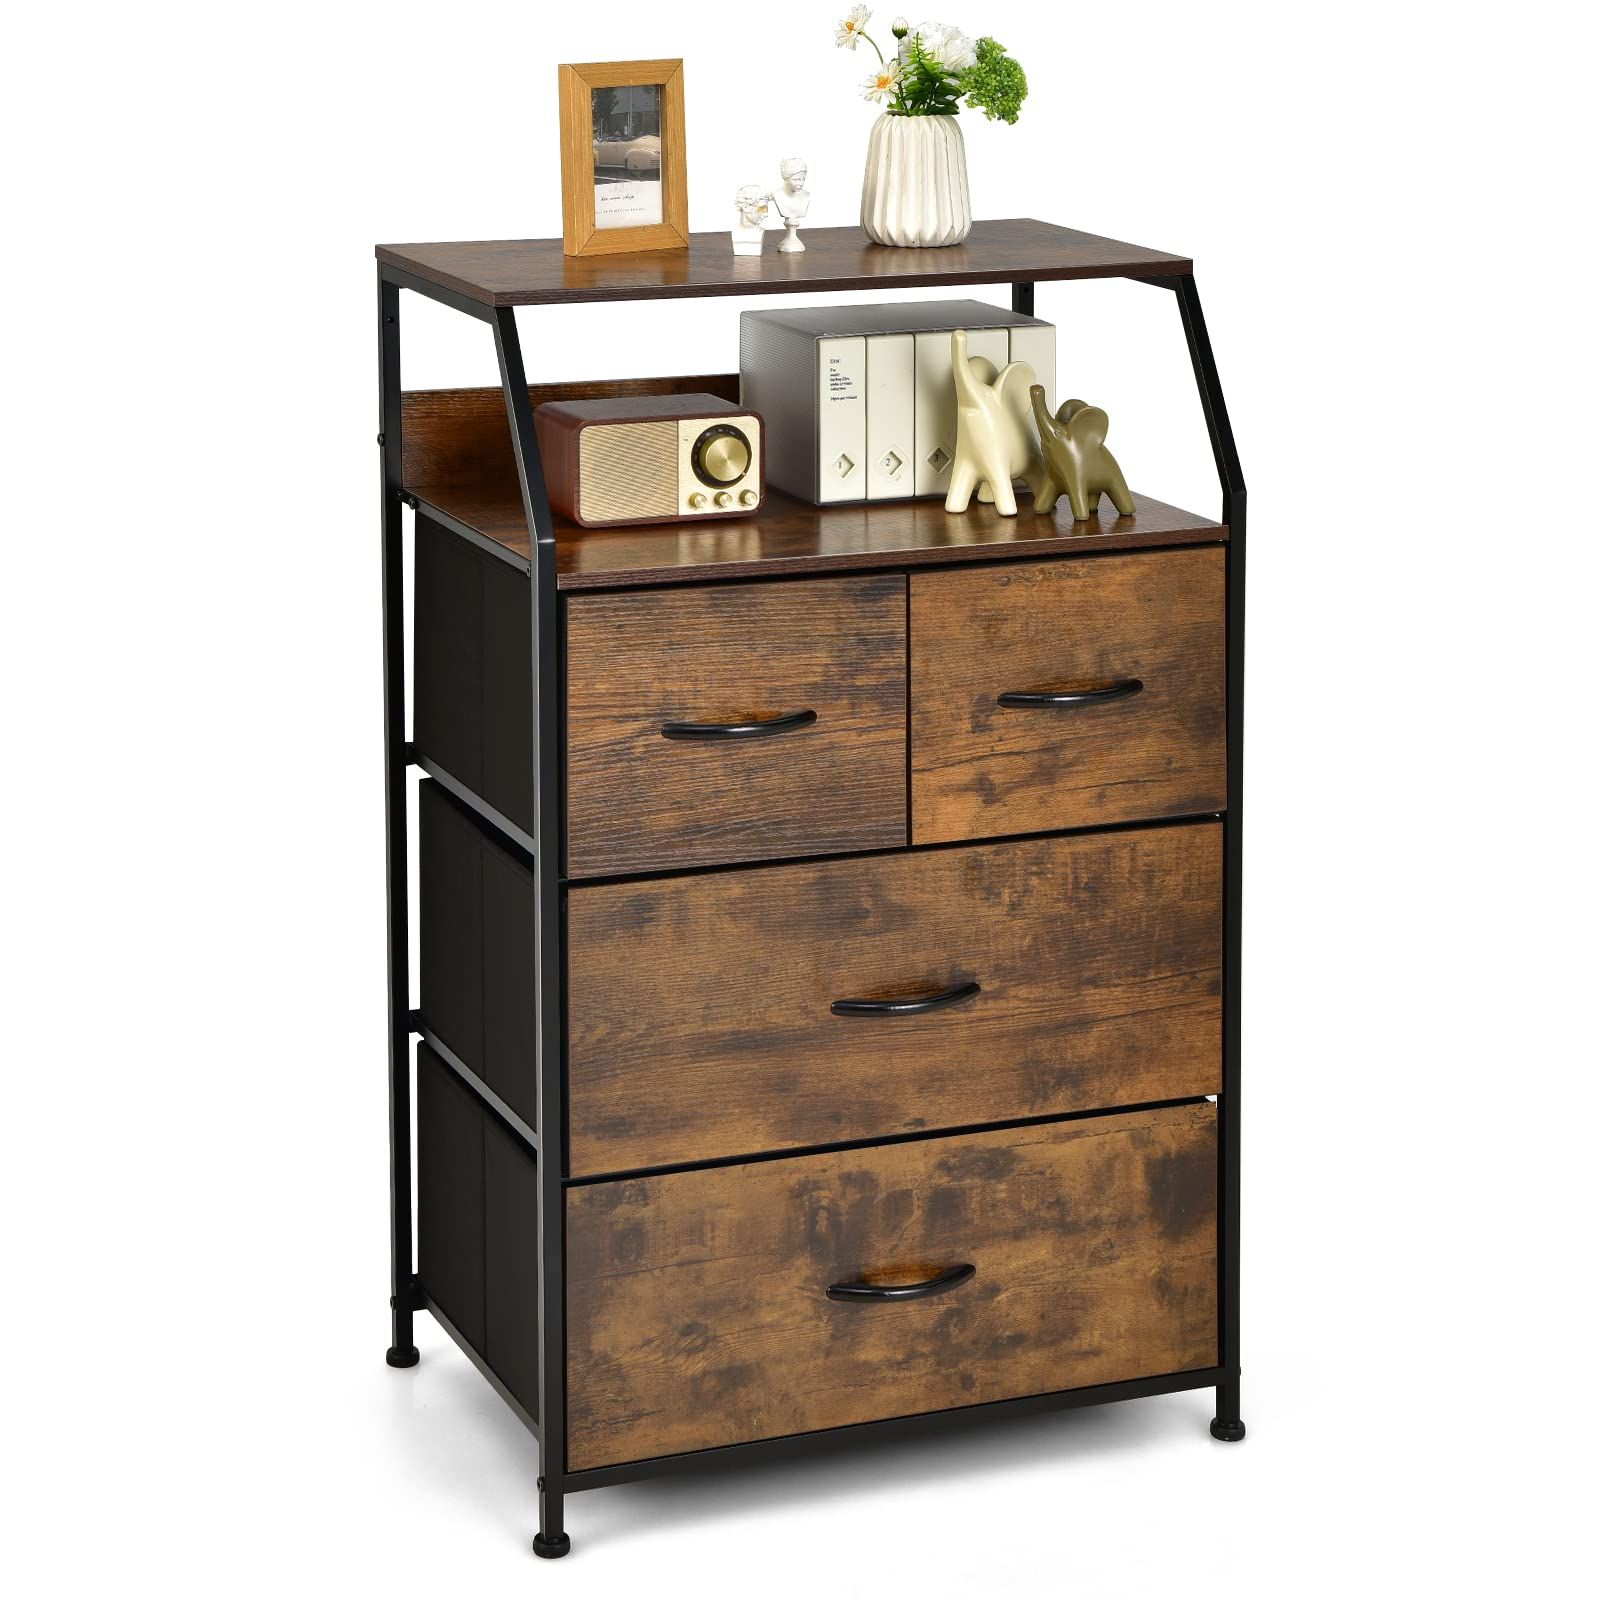 Giantex 4 Drawers Dresser, Tall Storage Tower w/ 5 Foldable Fabric Drawers & Open Shelves